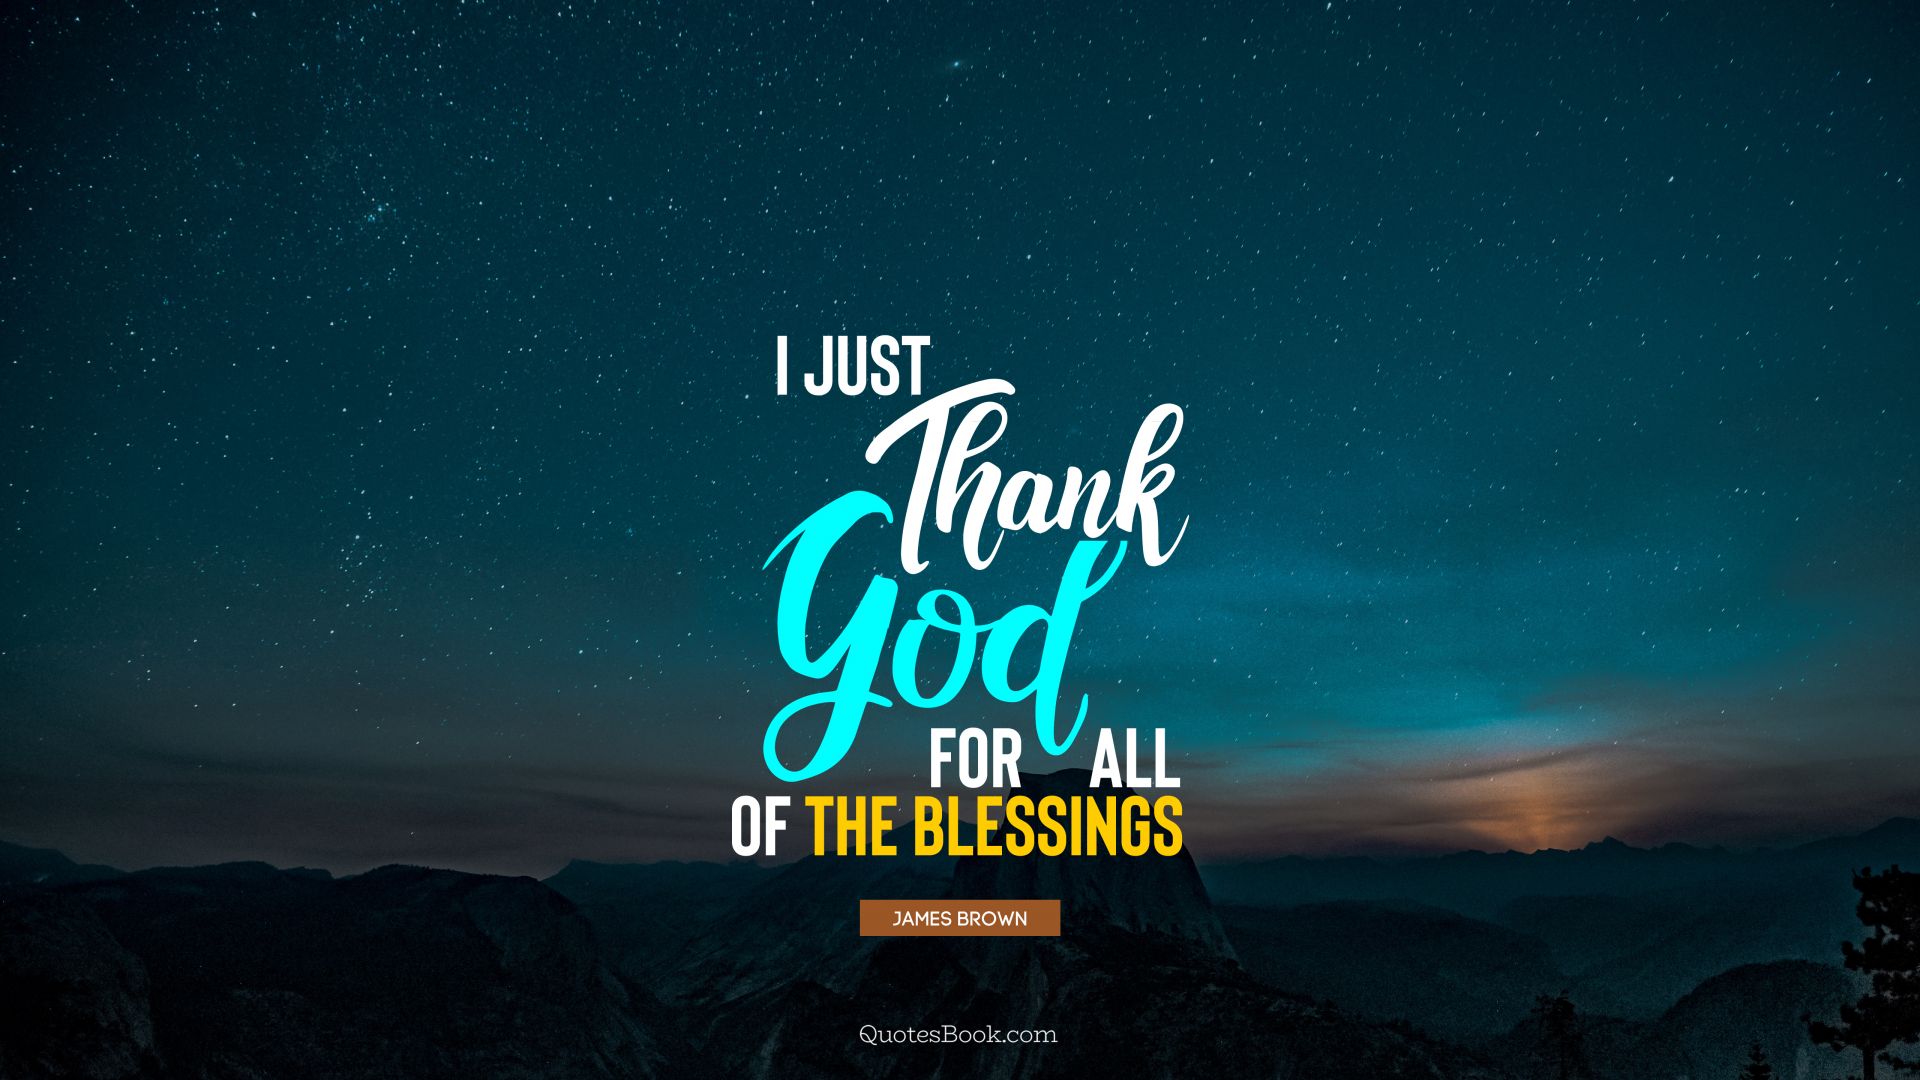 I just thank God for all of the blessings. - Quote by James Brown